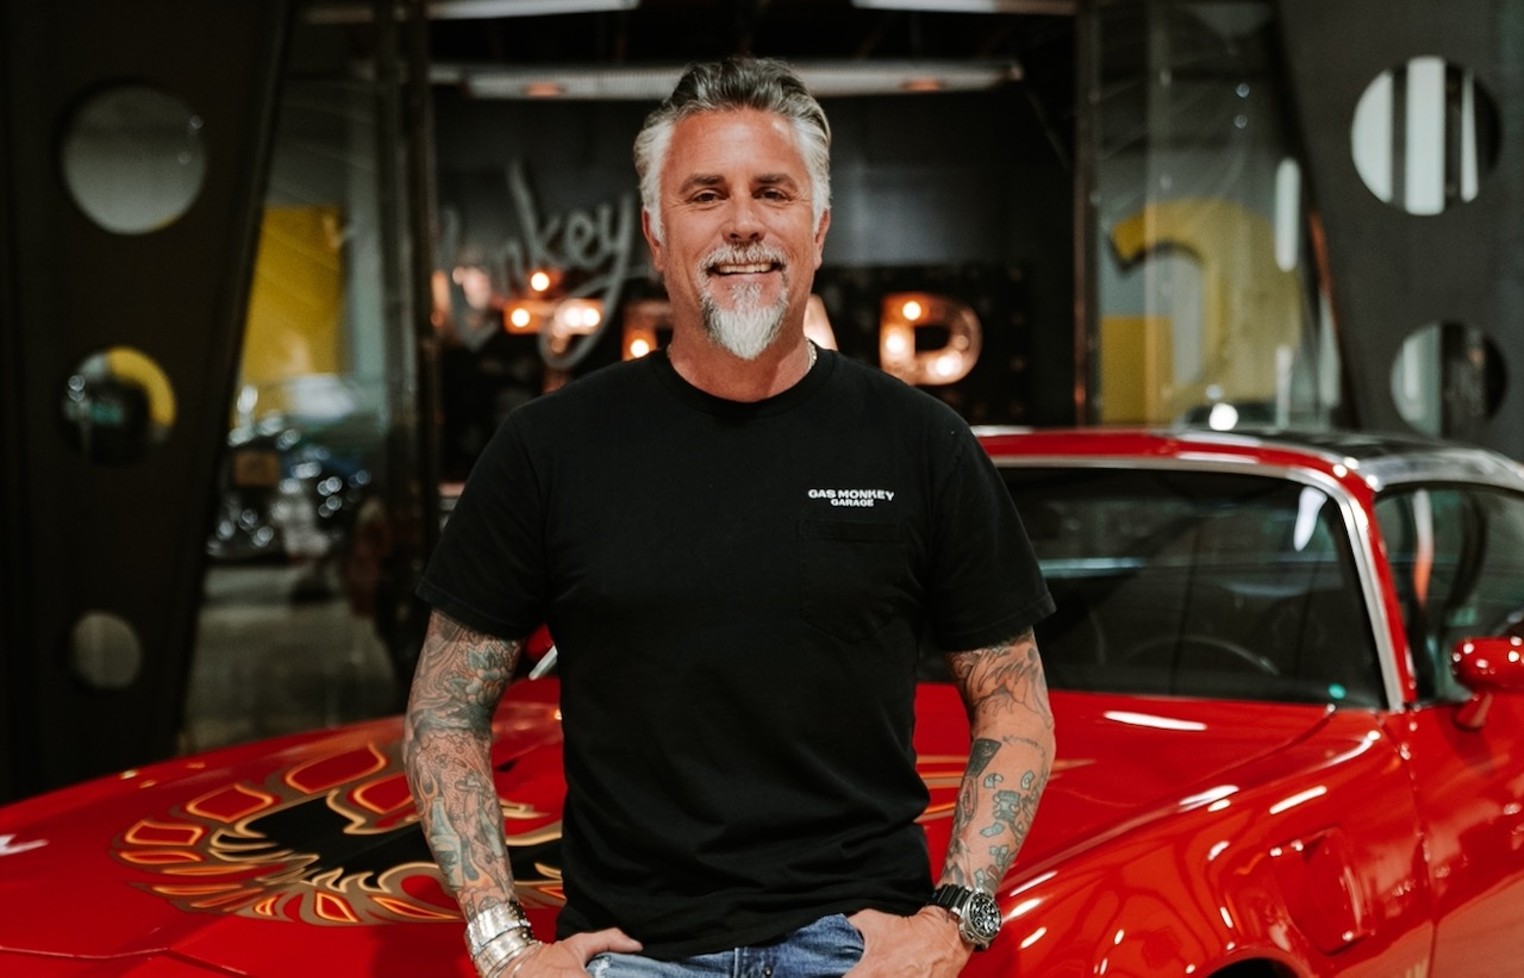 Gas Monkey Dallas: Large New Restaurant and Music Venue Planned for Early 2022